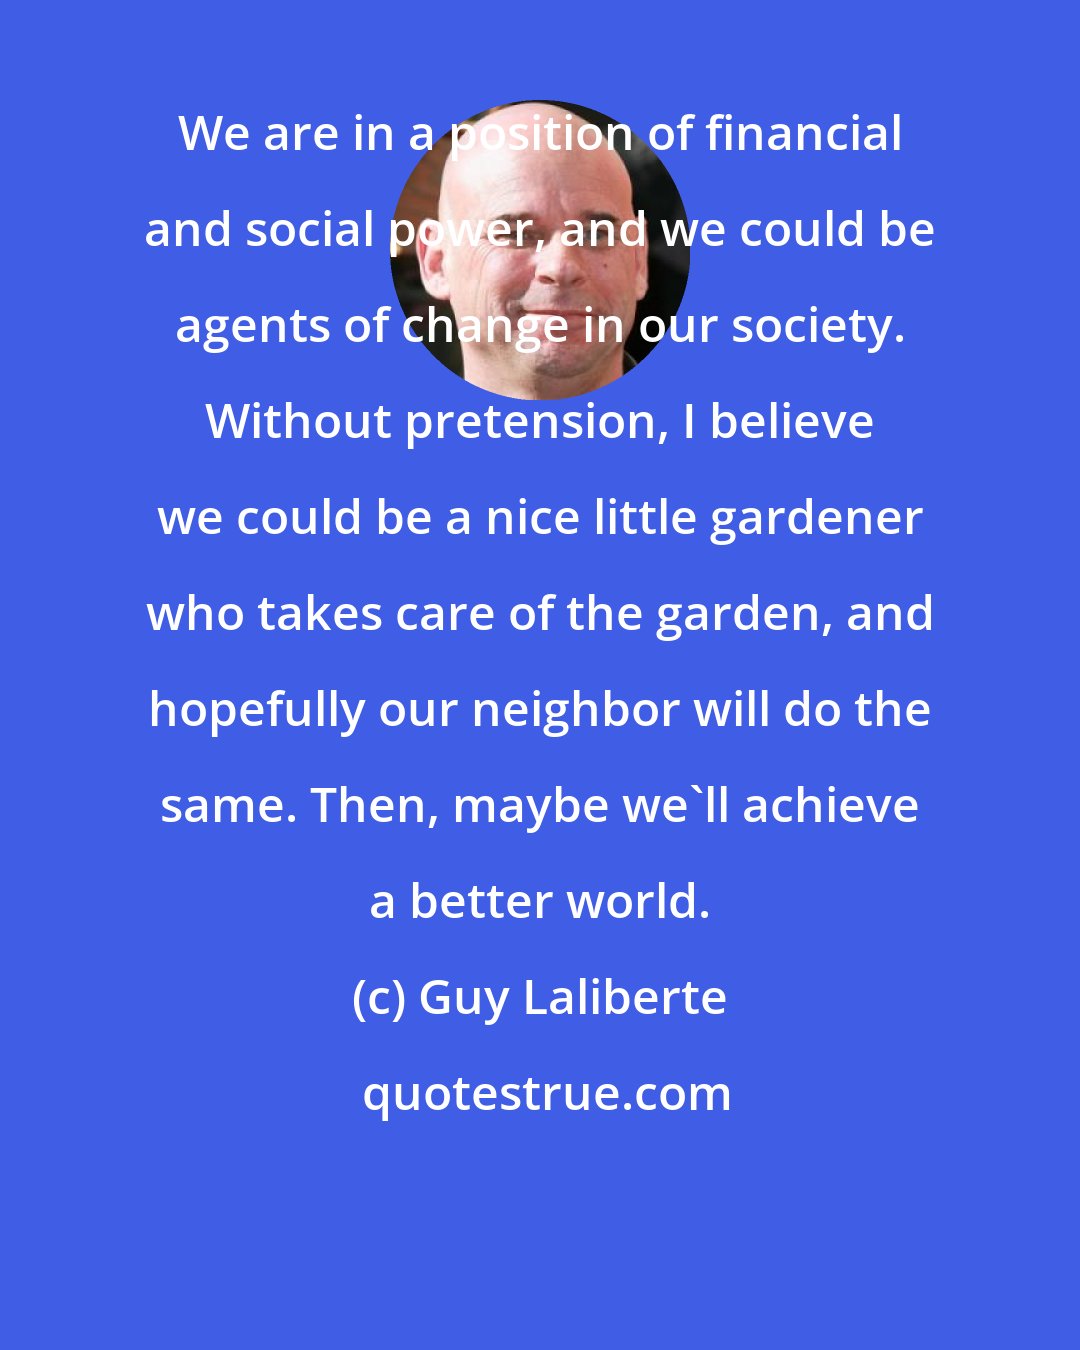 Guy Laliberte: We are in a position of financial and social power, and we could be agents of change in our society. Without pretension, I believe we could be a nice little gardener who takes care of the garden, and hopefully our neighbor will do the same. Then, maybe we'll achieve a better world.